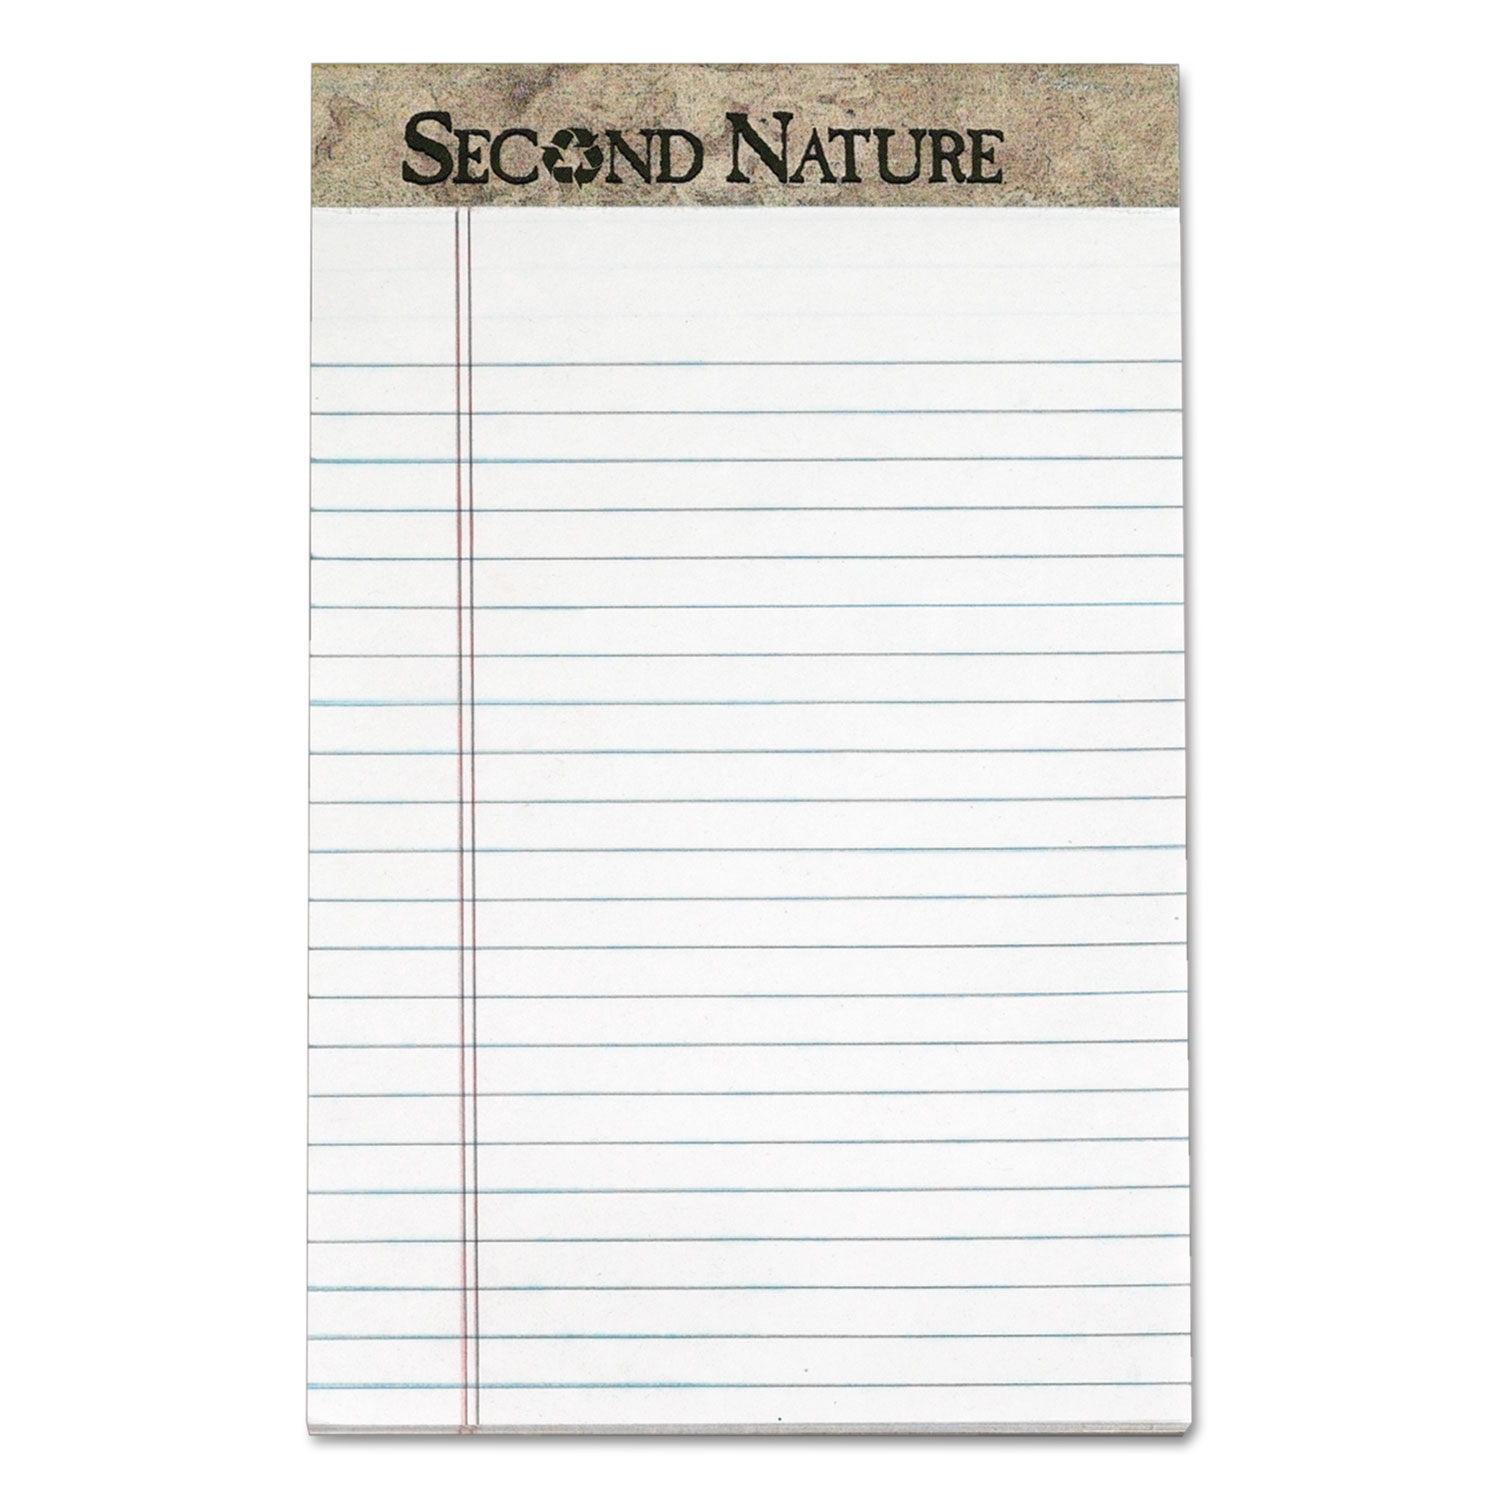  TOPS 74830 Second Nature Recycled Ruled Pads, Narrow Rule, 5 x 8, White, 50 Sheets, Dozen (TOP74830) 